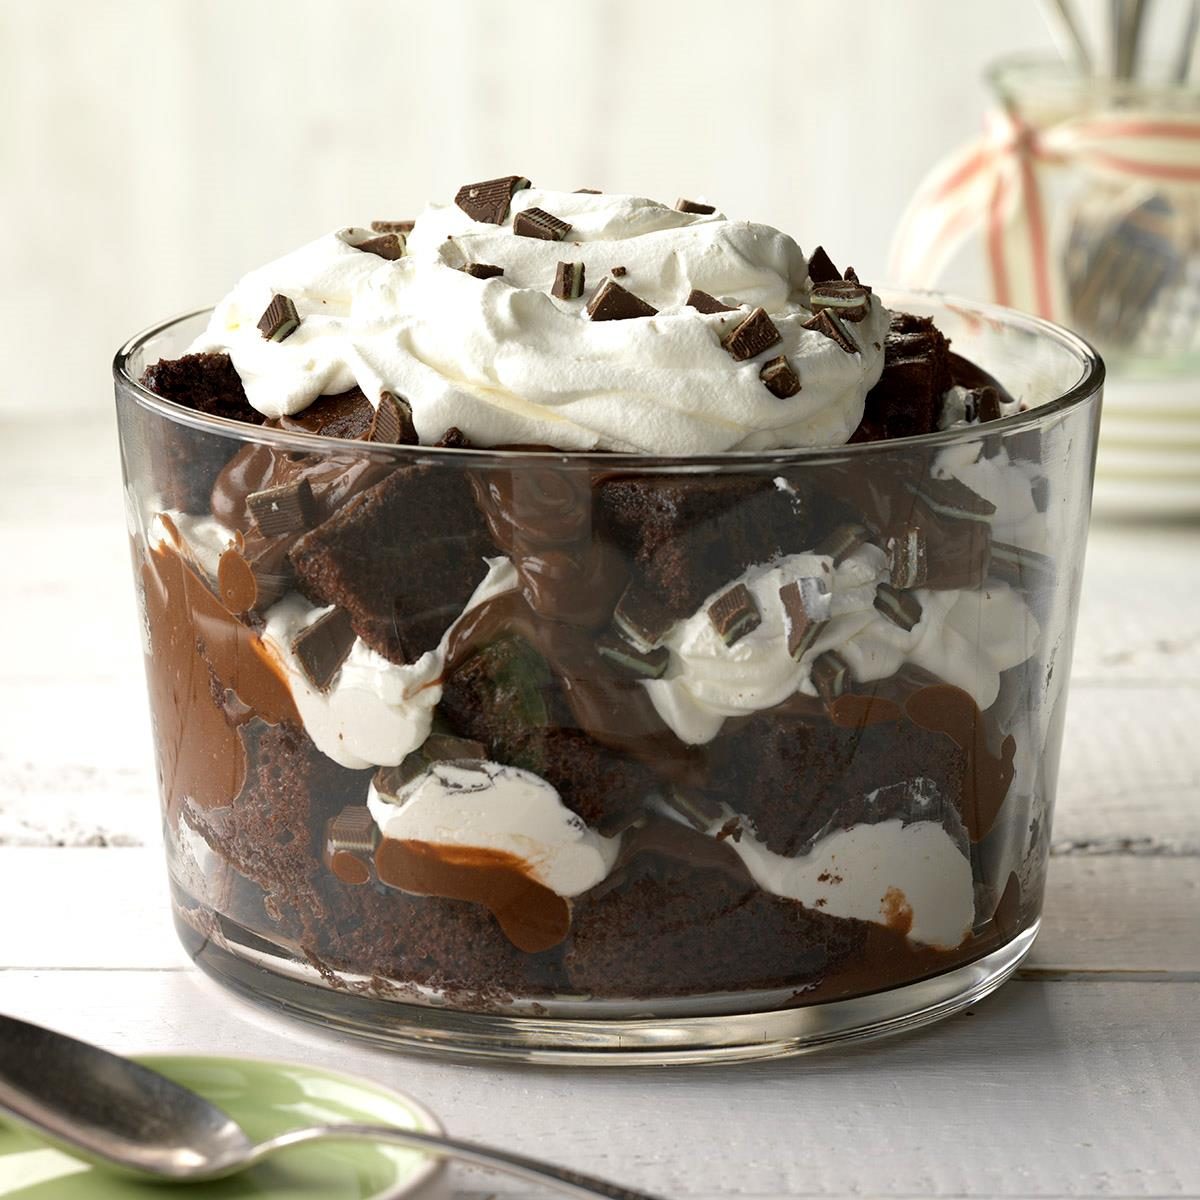 <p>Instead, make a trifle by layering salvaged cake pieces with fresh whipped cream and fruit in a pretty glass bowl, advises Tamar Adler, chef and author of <em>An Everlasting Meal: Cooking with Economy and Grace</em>. Plus, don’t miss the <a href="https://www.tasteofhome.com/article/how-to-make-whipped-cream/" rel="noopener">best homemade whipped cream topping.</a></p>